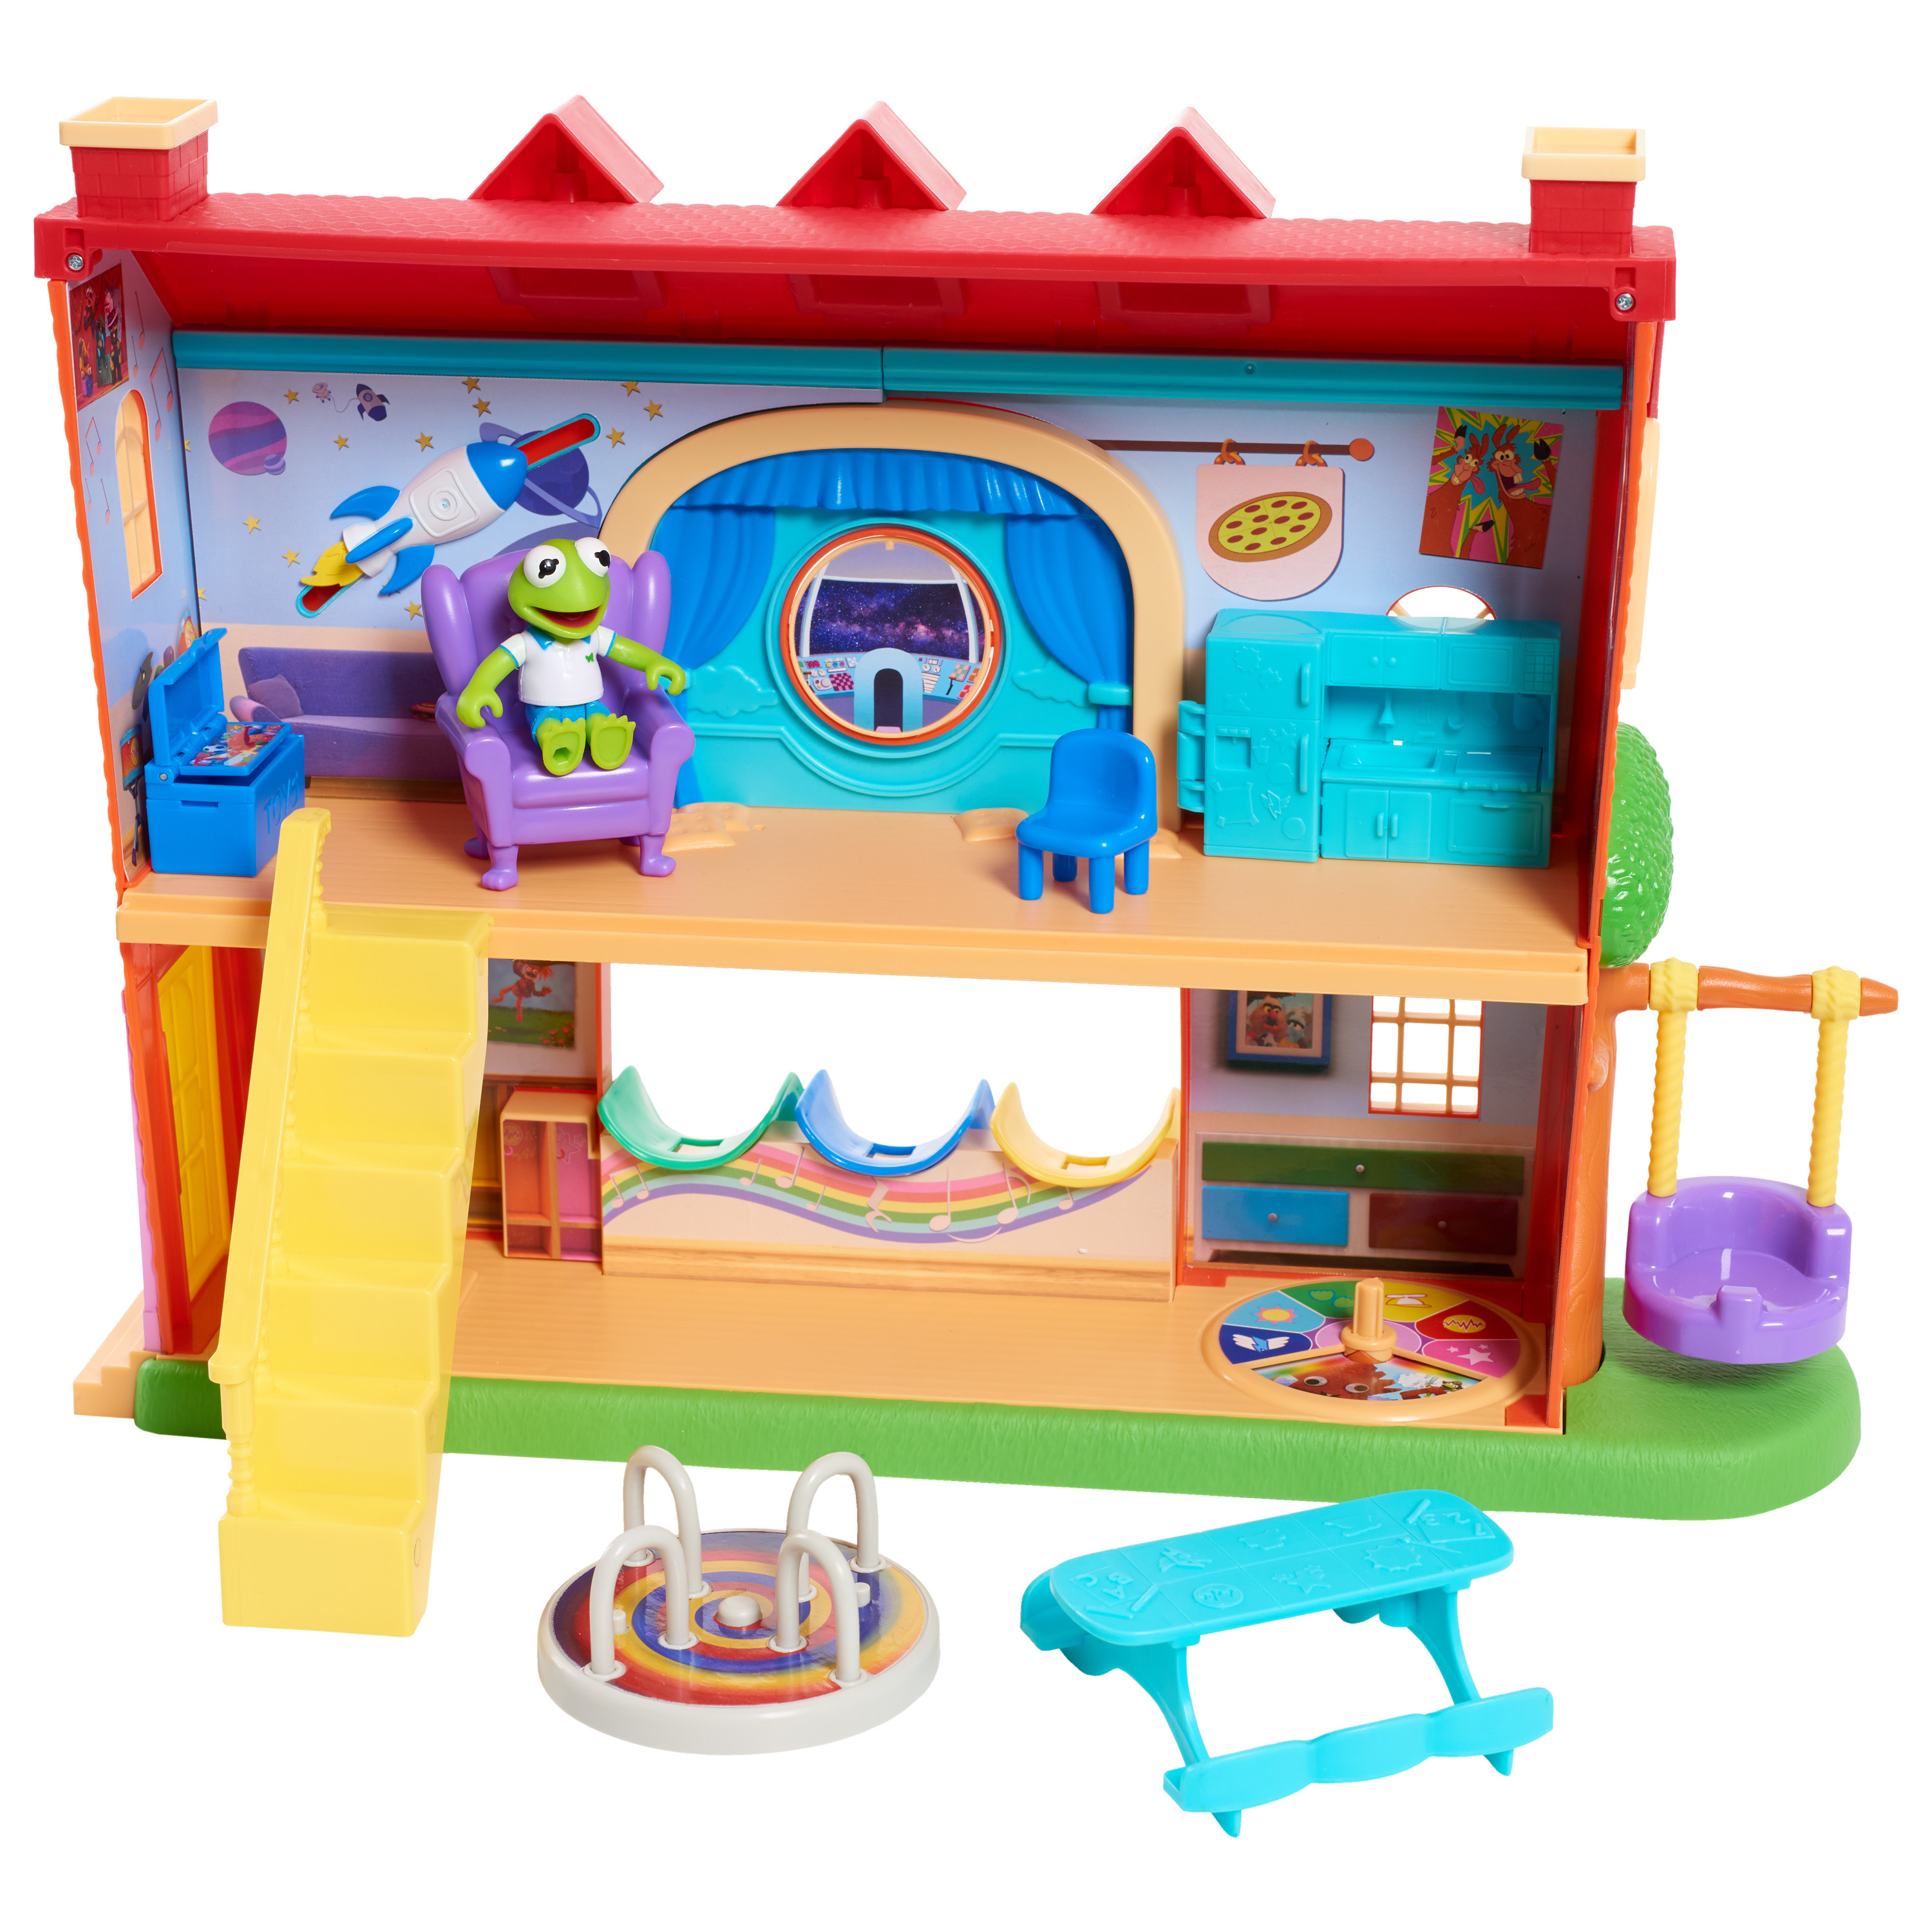 Disney Junior Muppets Babies School House Playset, Includes Articulated Kermit the Frog Figure and Accessories, Officially Licensed Kids Toys for Ages 3 Up, Gifts and Presents - image 3 of 3